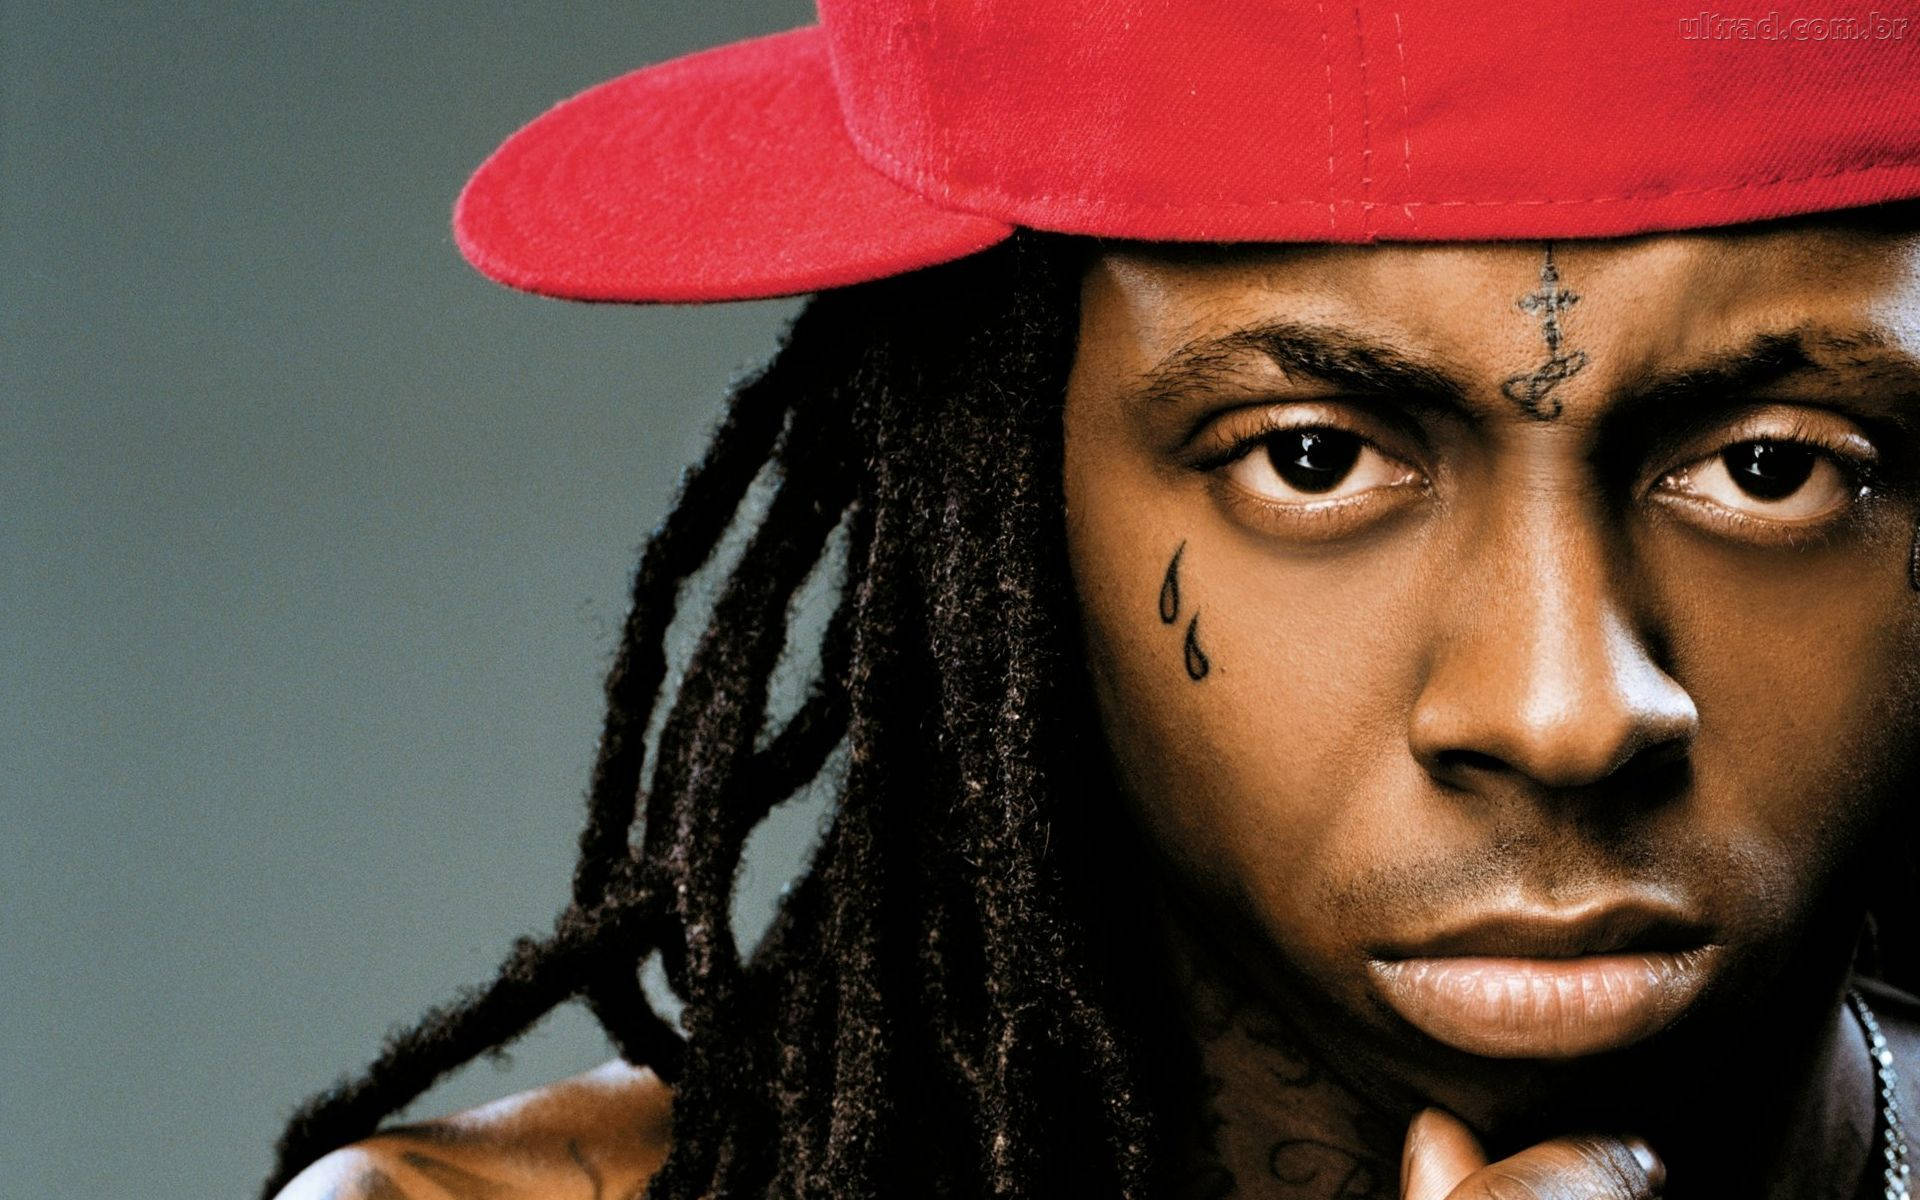 Caption: Lil Wayne Performing On Stage Background